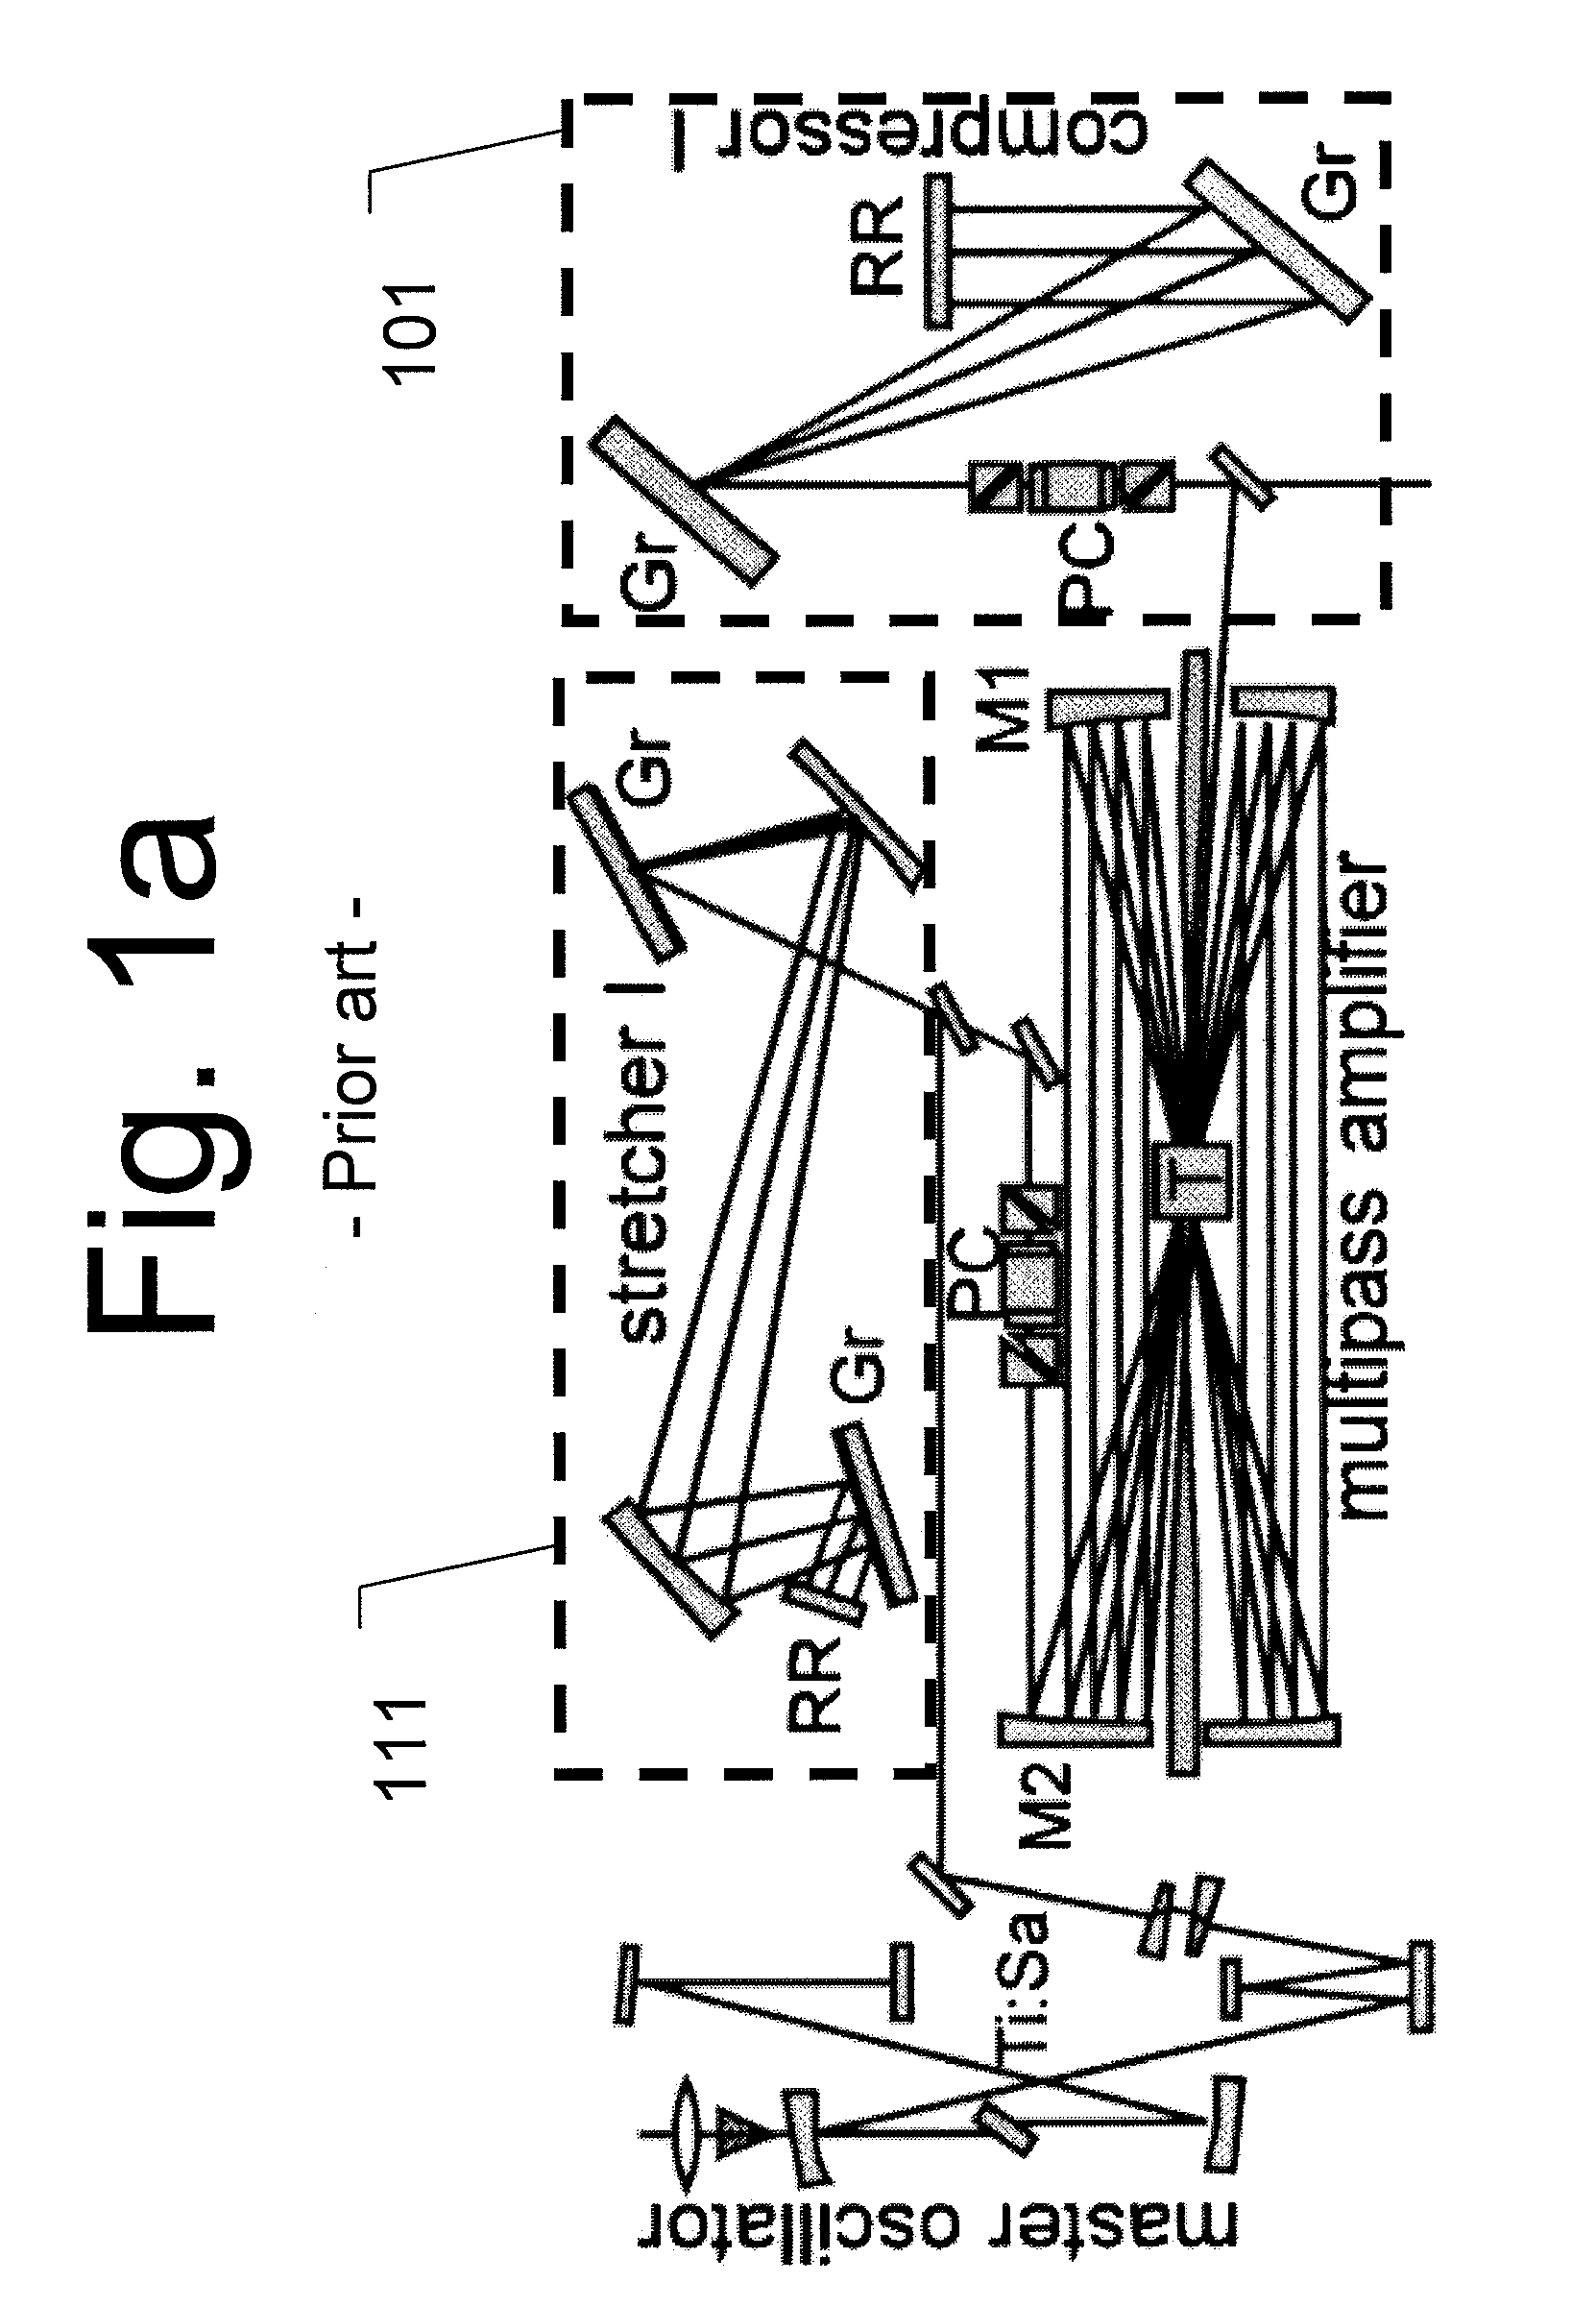 Multi-plate composite volume bragg gratings, systems and methods of use thereof